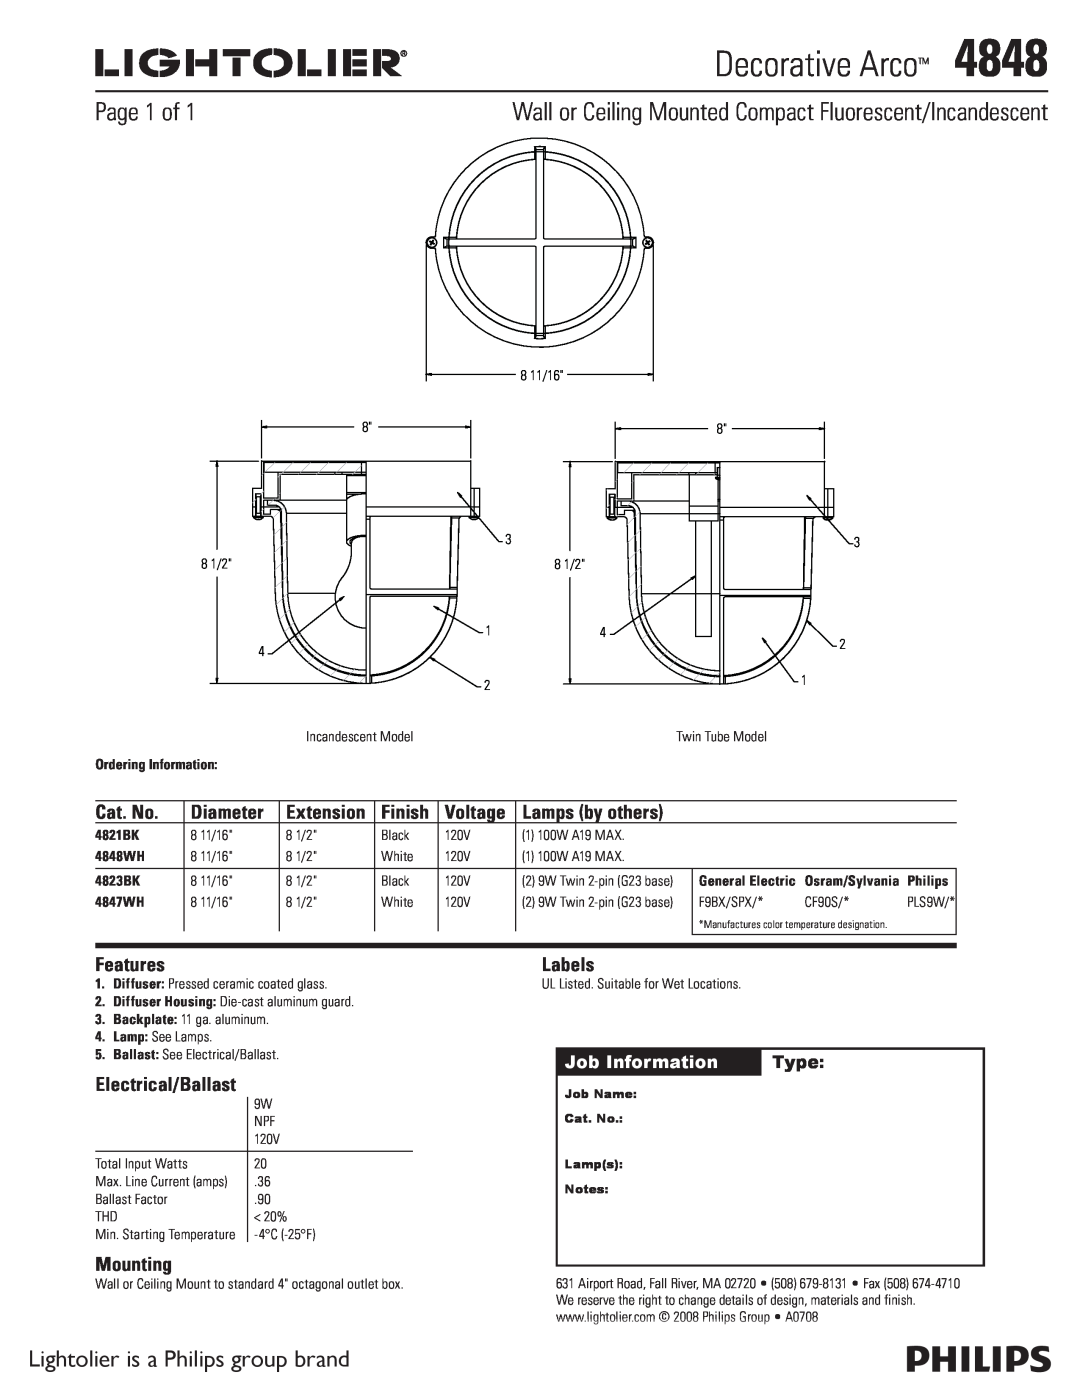 Lightolier 4848 manual Decorative Arco, Page 1 of, Lightolier is a Philips group brand, Cat. No, Diameter, Finish, Voltage 